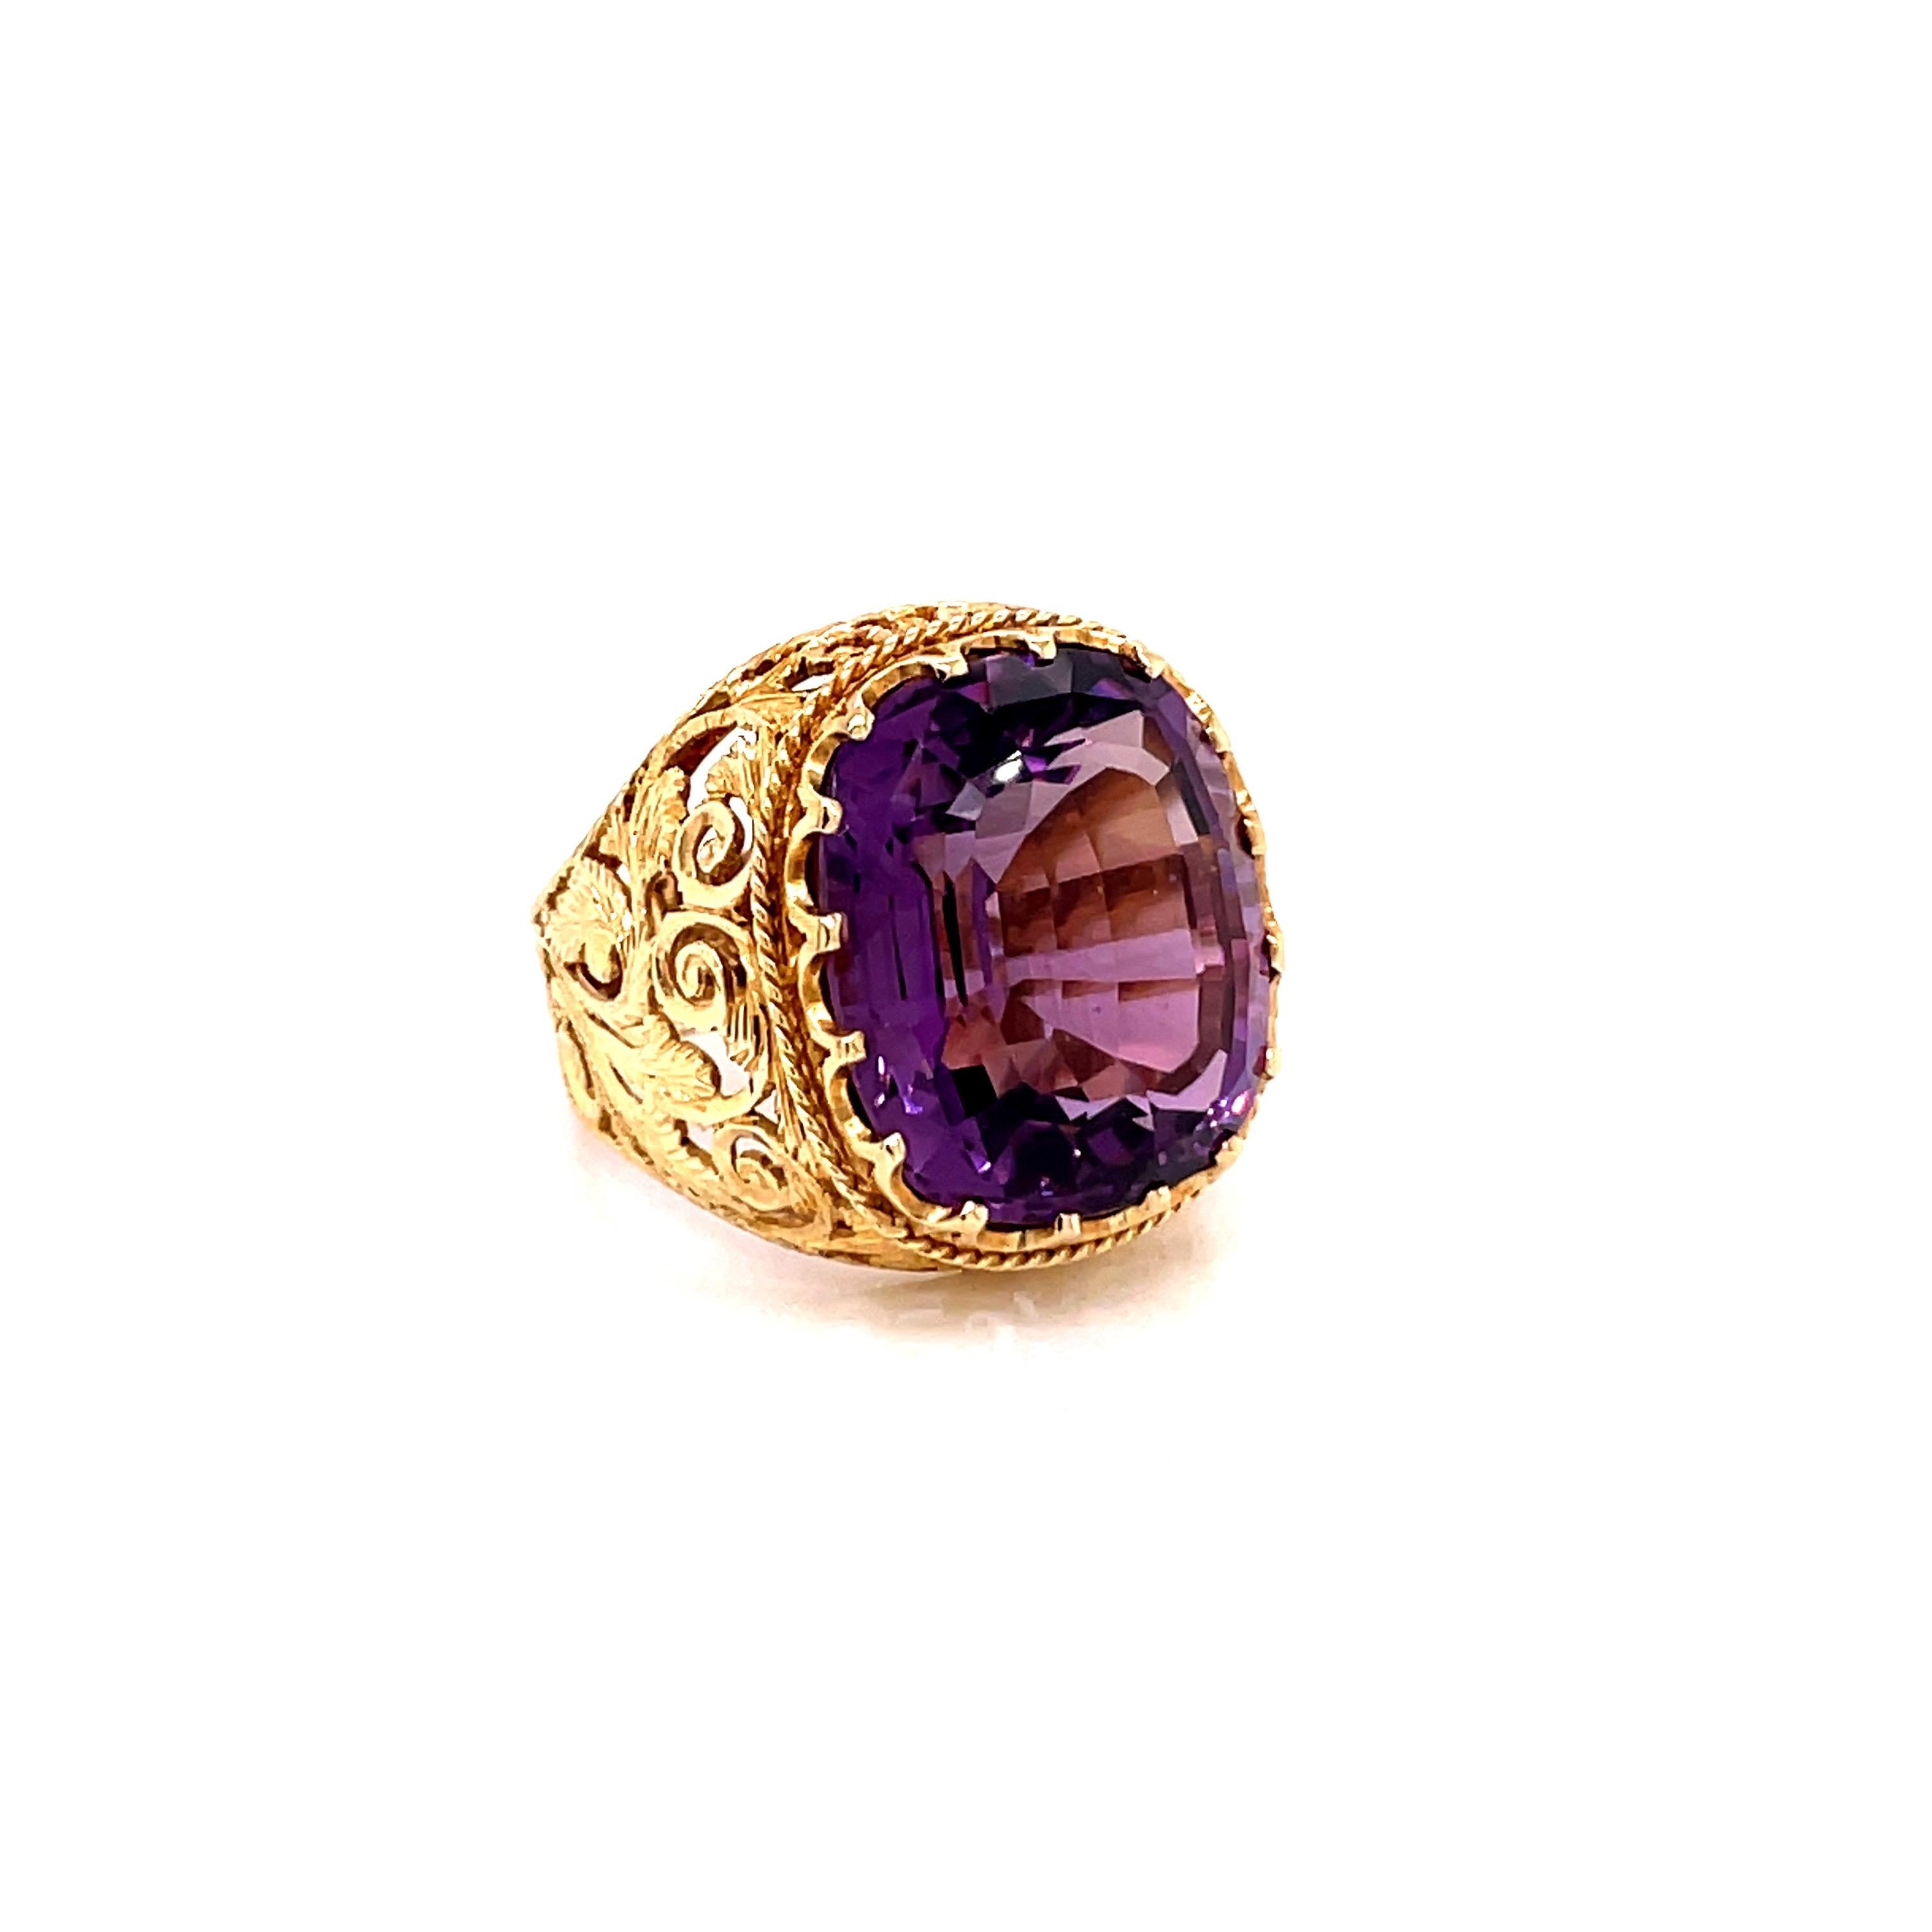 Vintage 1980's 15ct Cushion Cut Amethyst Ring - the amethyst weighs approximately 15ct and measures 17.6 x 14.8mm.  The setting is an 18k yellow gold hand carved filigree setting with a finger size 8 which can be sized upon request.  The ring weighs